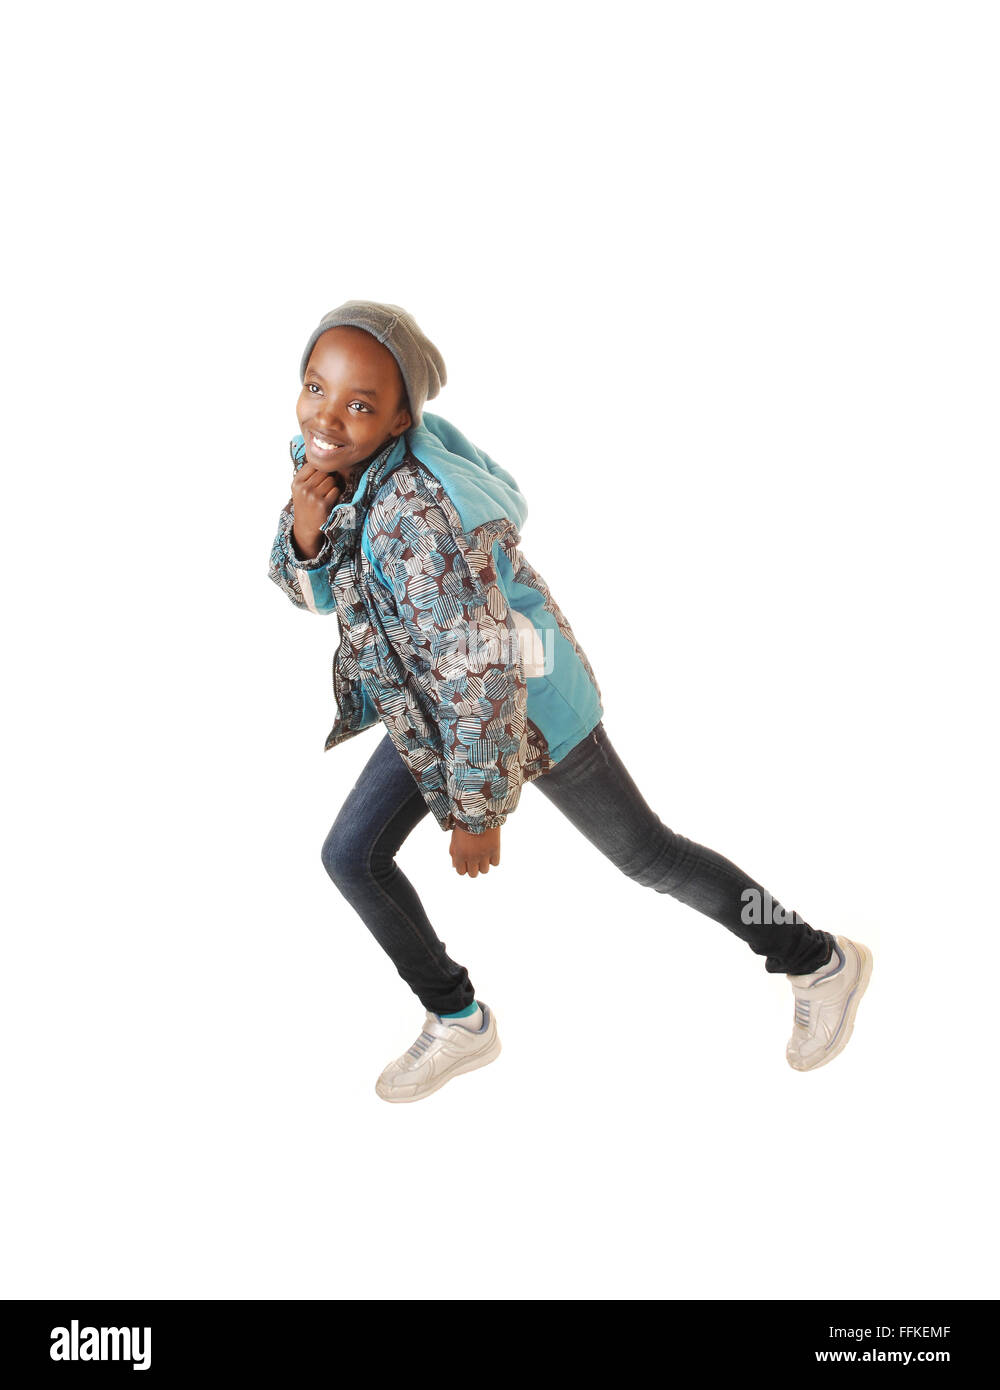 A young pretty black girl in jeans and a blue jacket dancing for white background in the studio. Stock Photo